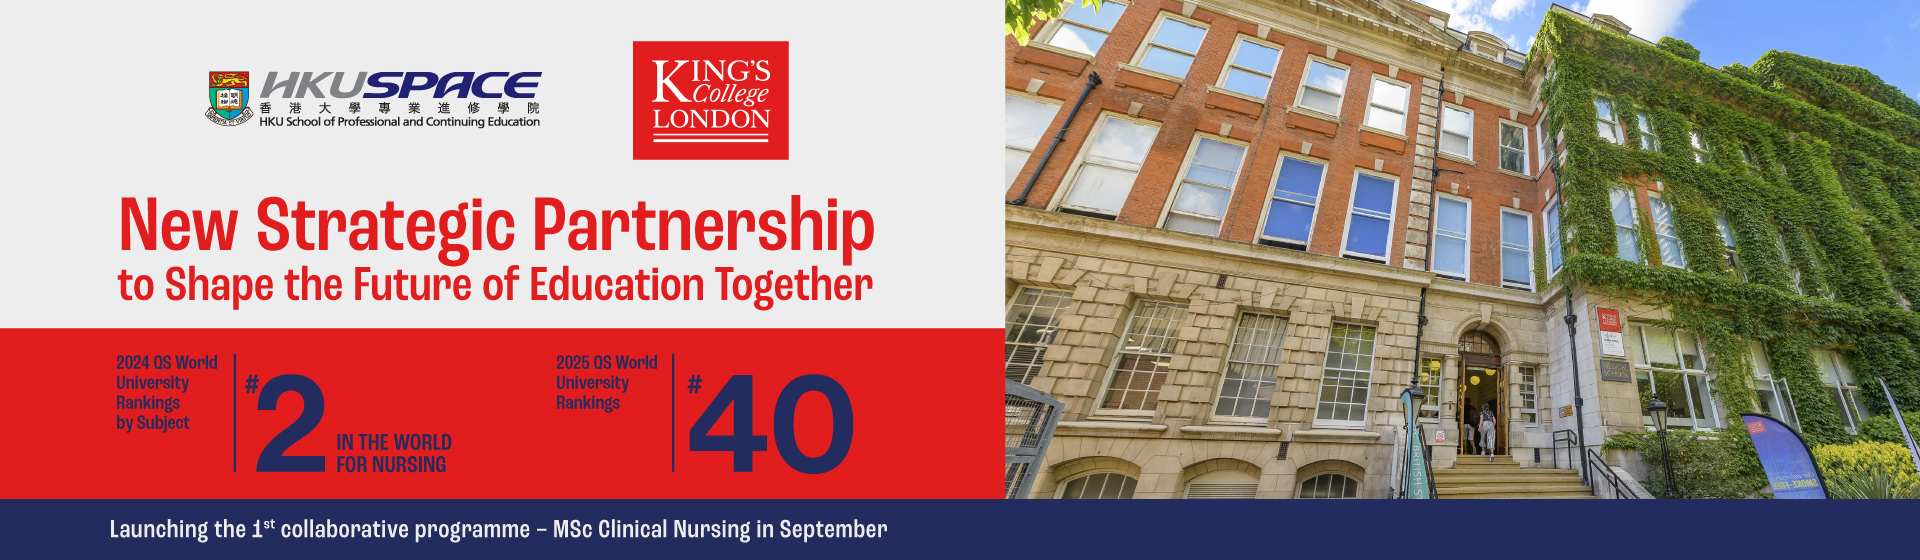 HKU SPACE Enters into Strategic Partnership with King’s College London